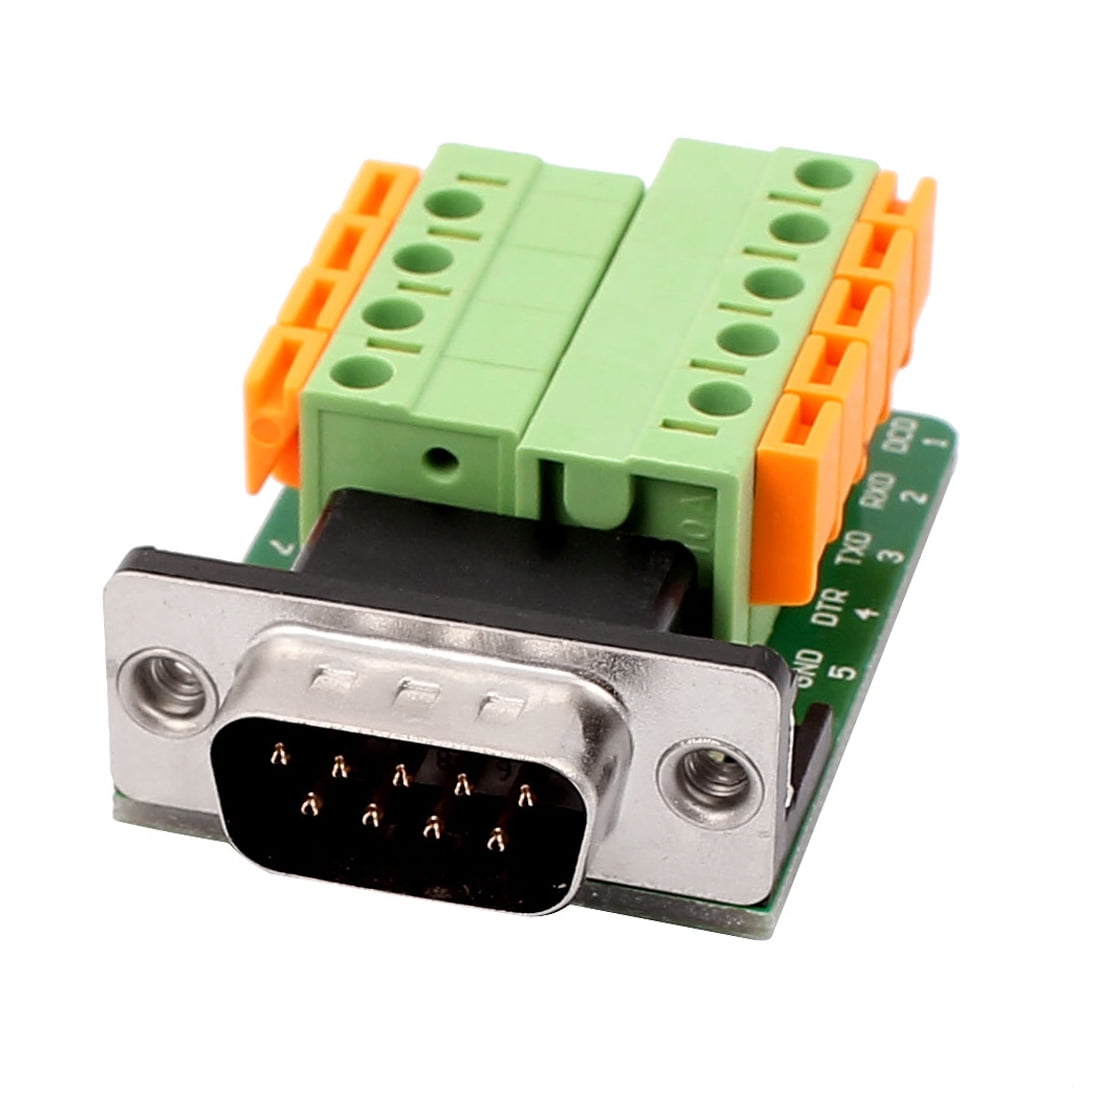 DB9 Male Signals Terminal Module Adapter RS232 Serial to Terminal DB9 Connector 